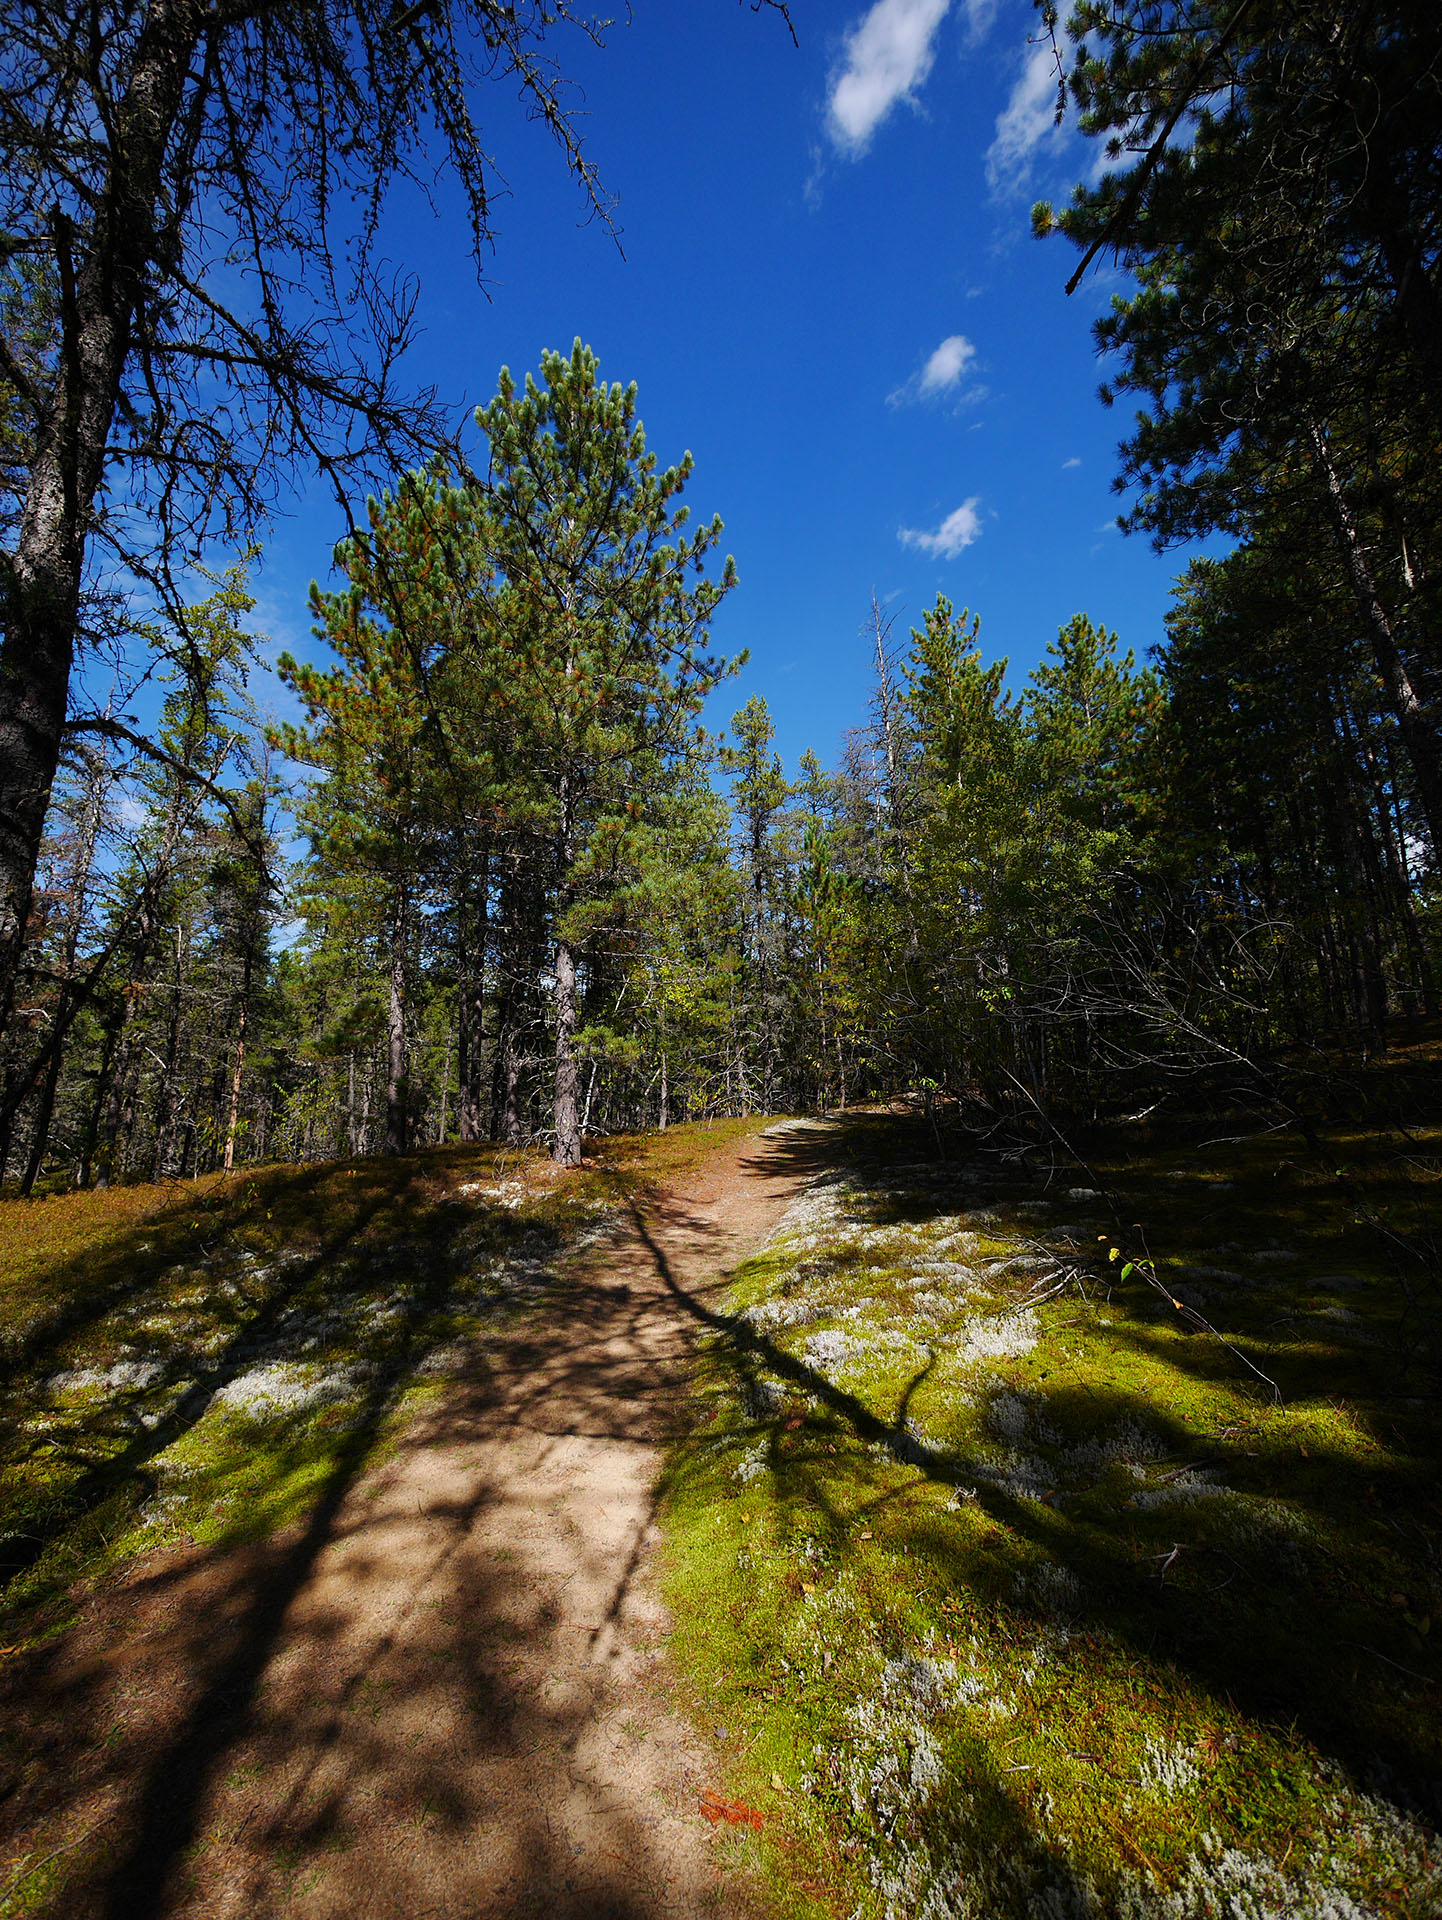 hiking trail surrounded by tall green pines under a bright blue sky